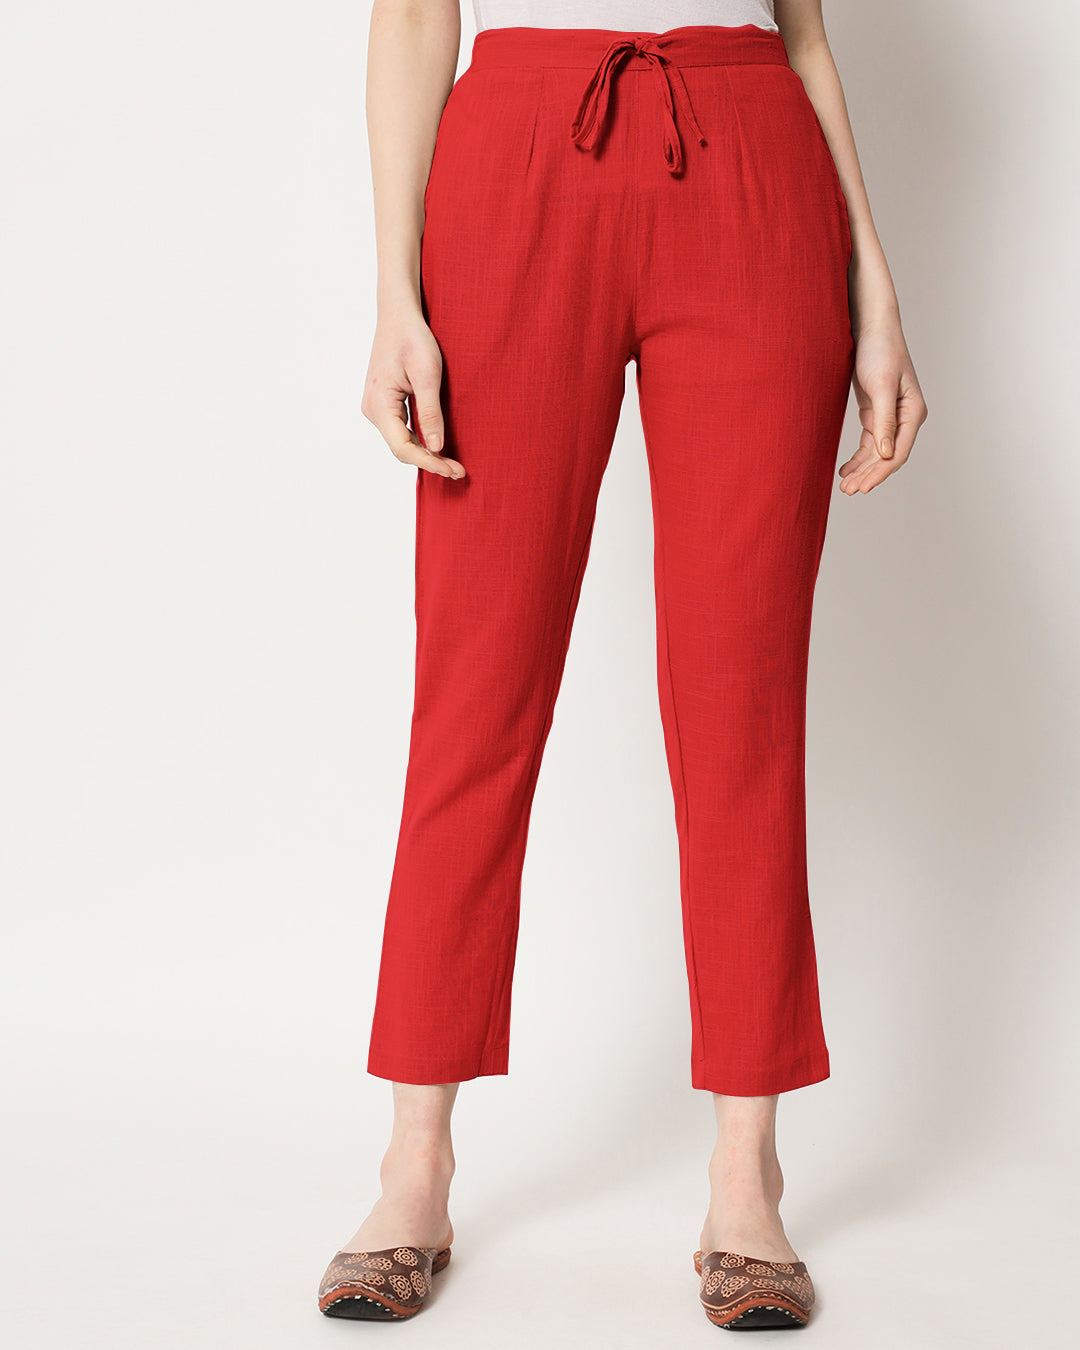 Combo: Classic Red & Valley Vista Cigarette Pants- Set of 2